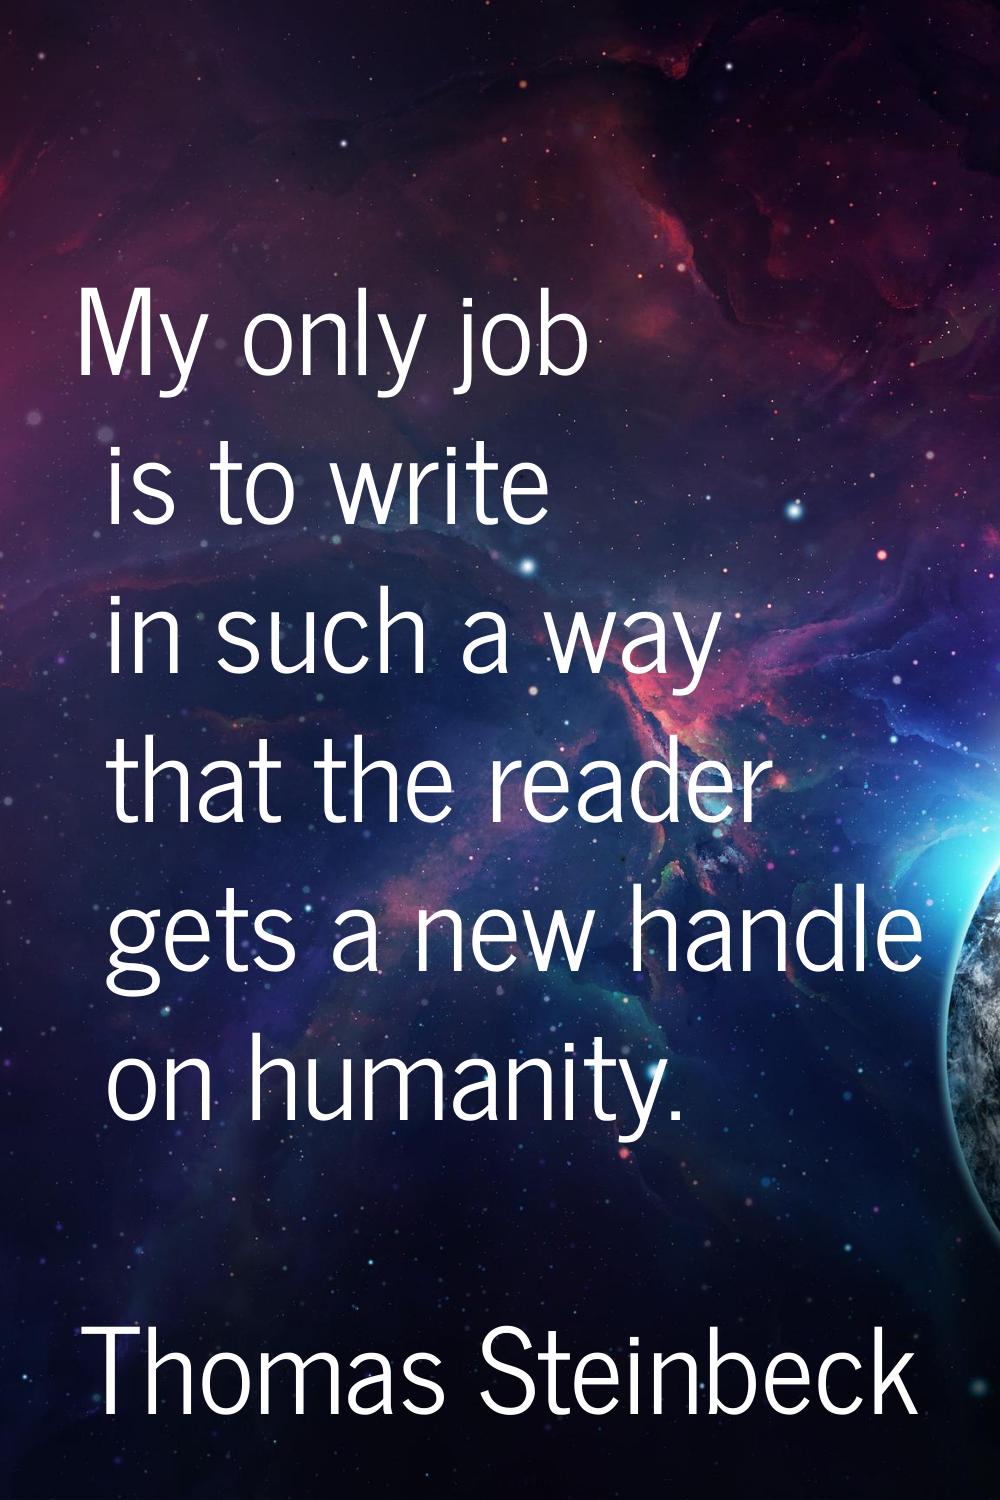 My only job is to write in such a way that the reader gets a new handle on humanity.